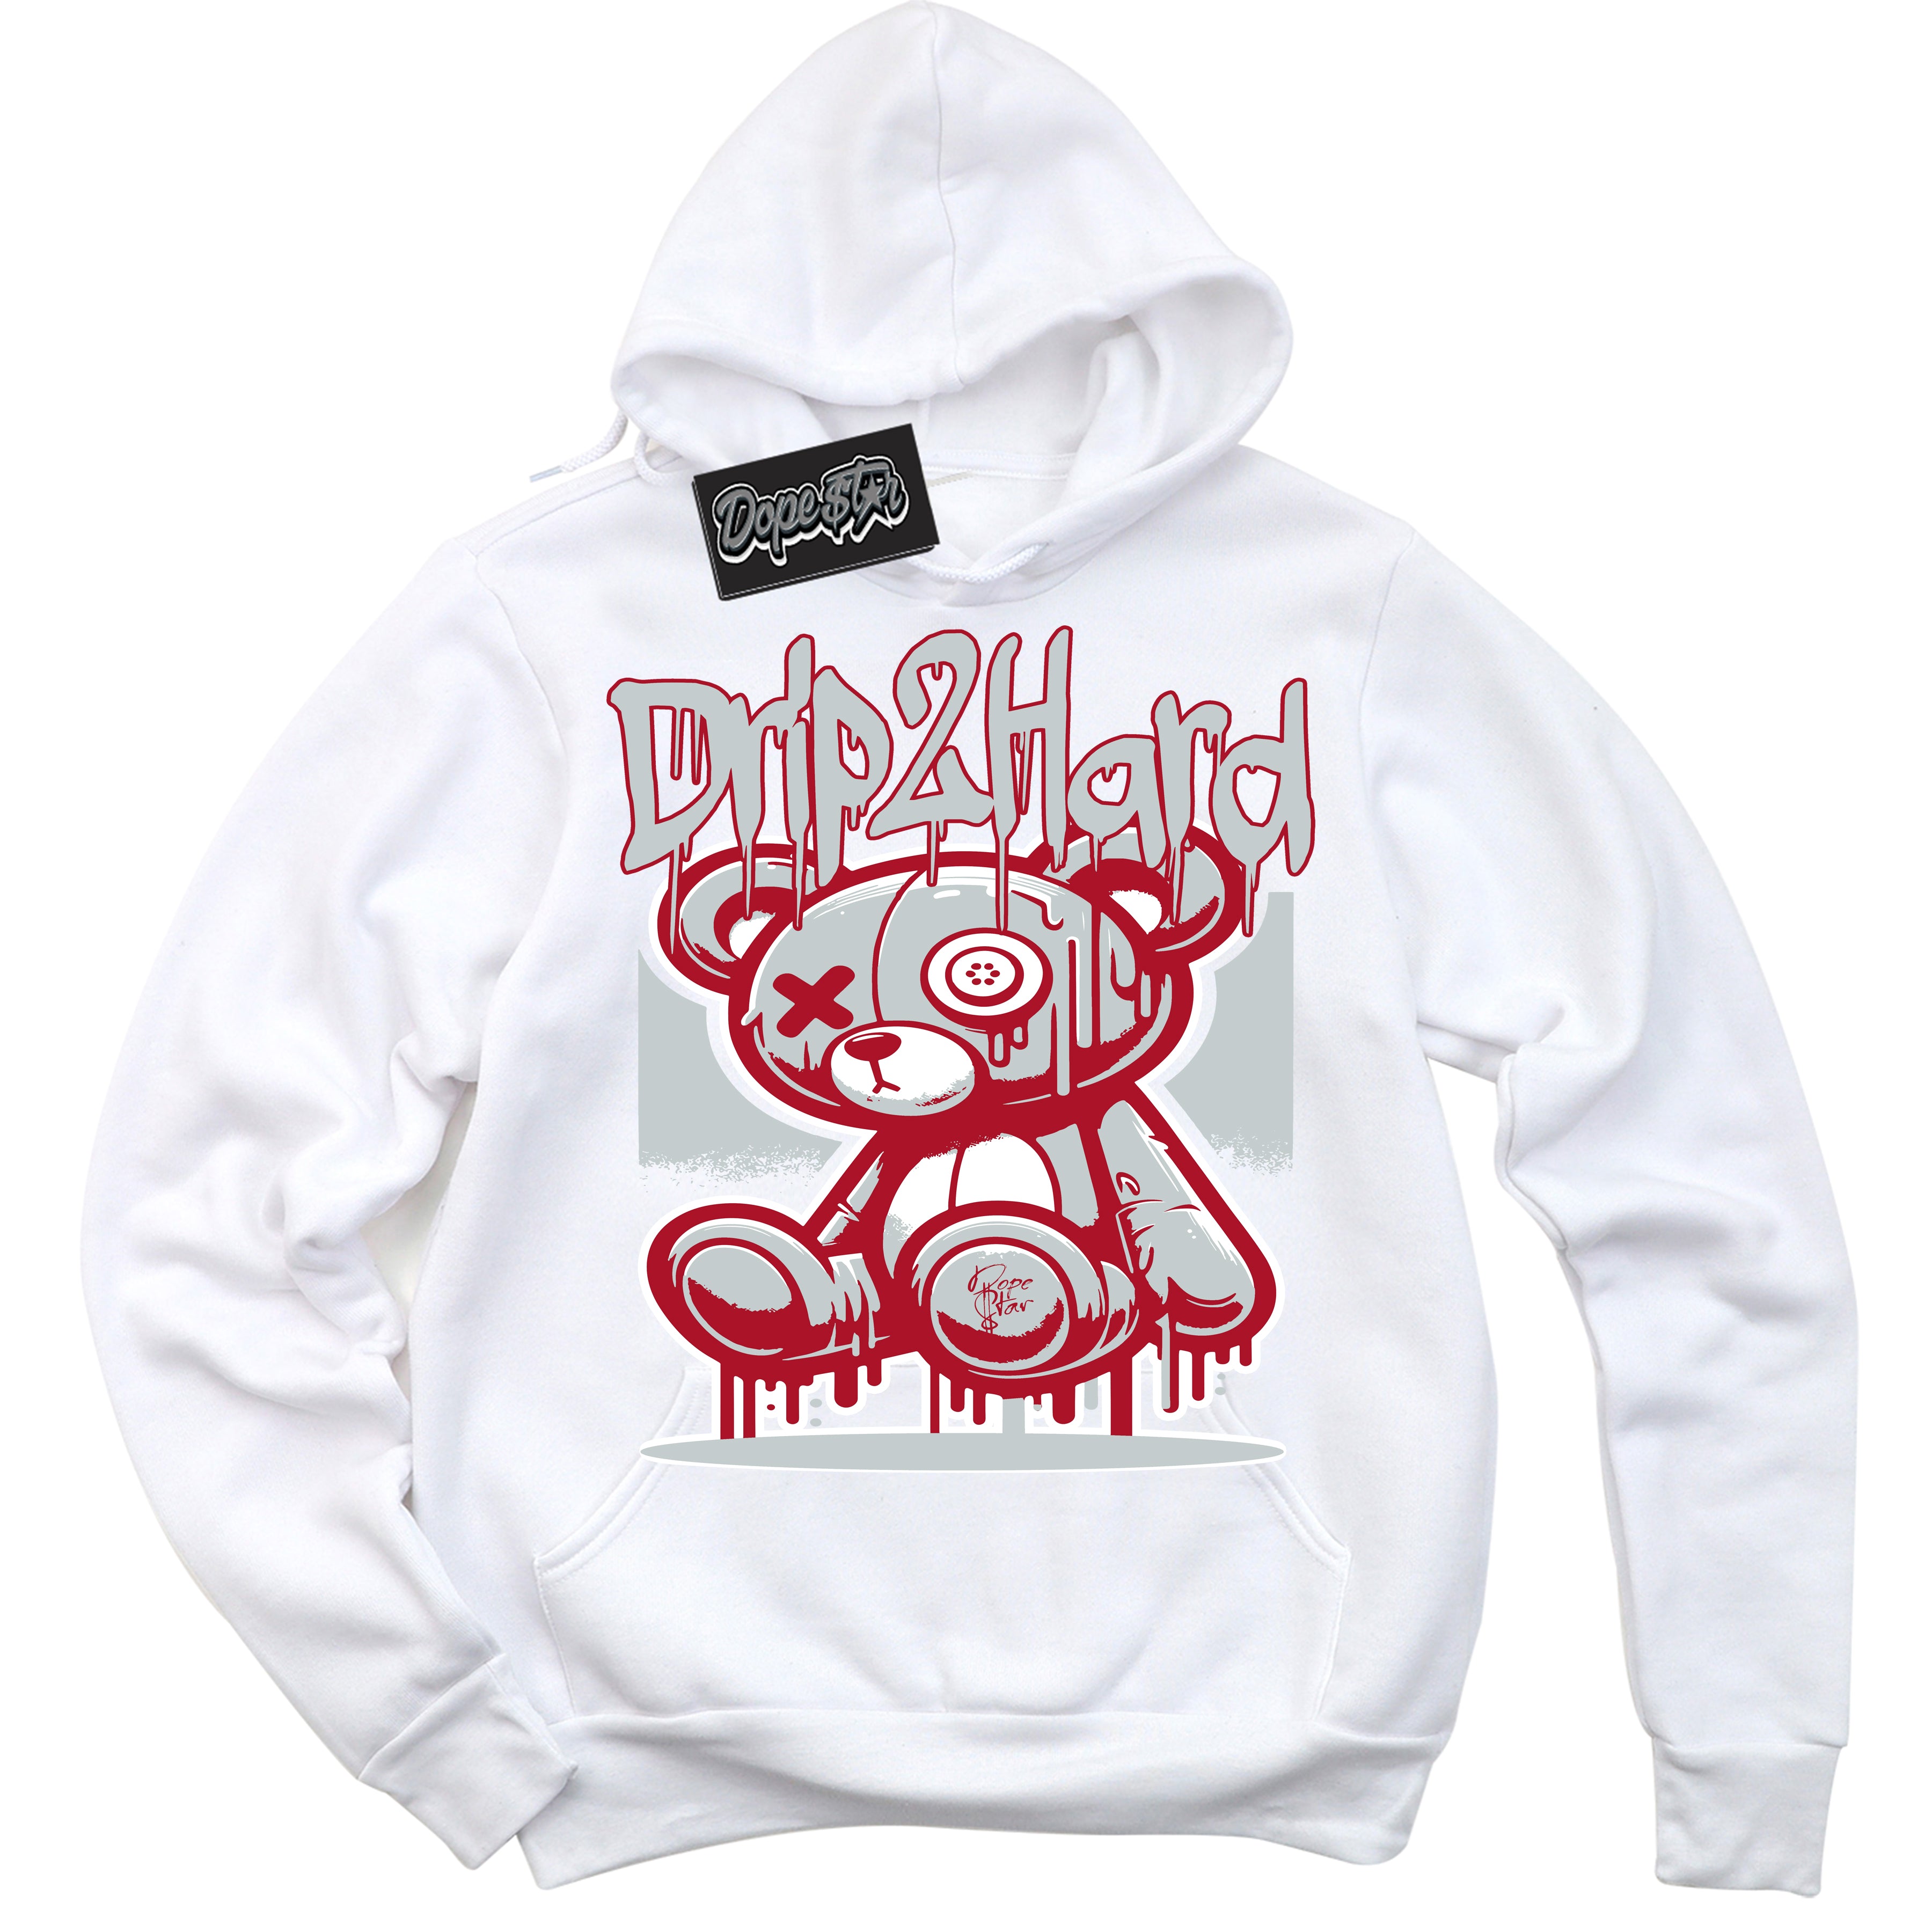 Cool White Hoodie with “ Drip 2 Hard ”  design that Perfectly Matches  Reverse Ultraman Sneakers.